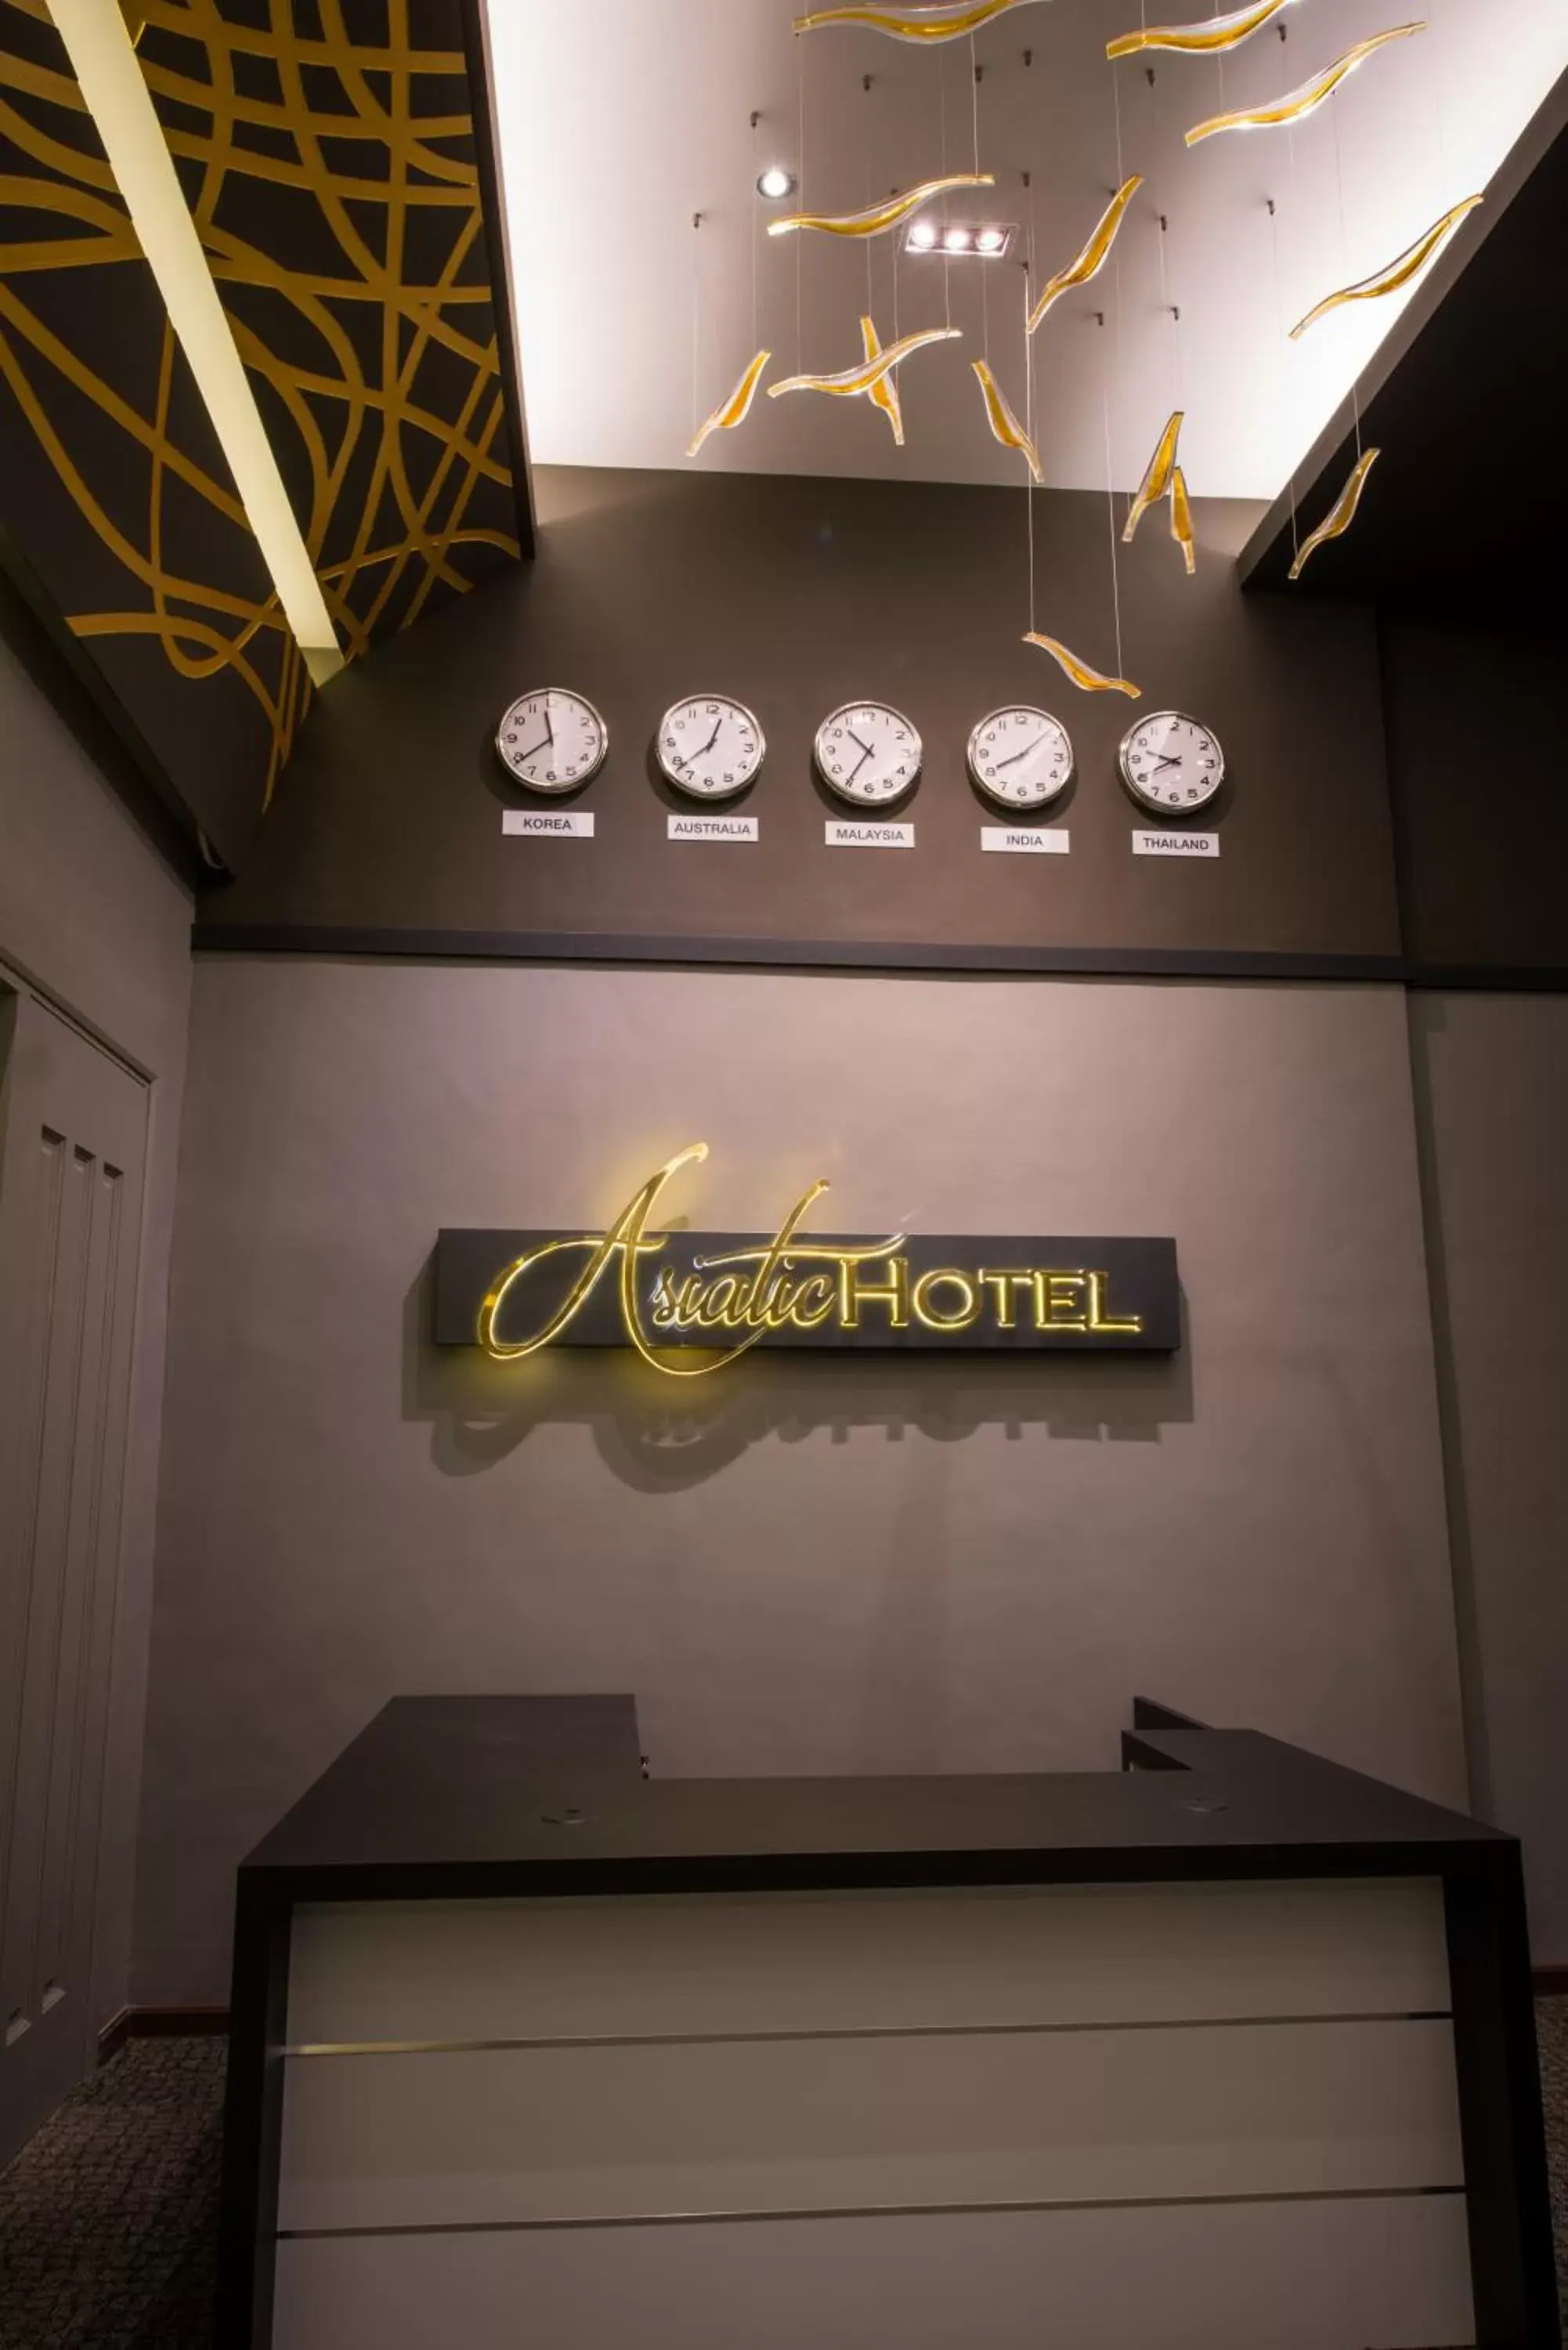 Property logo or sign in Asiatic Hotel